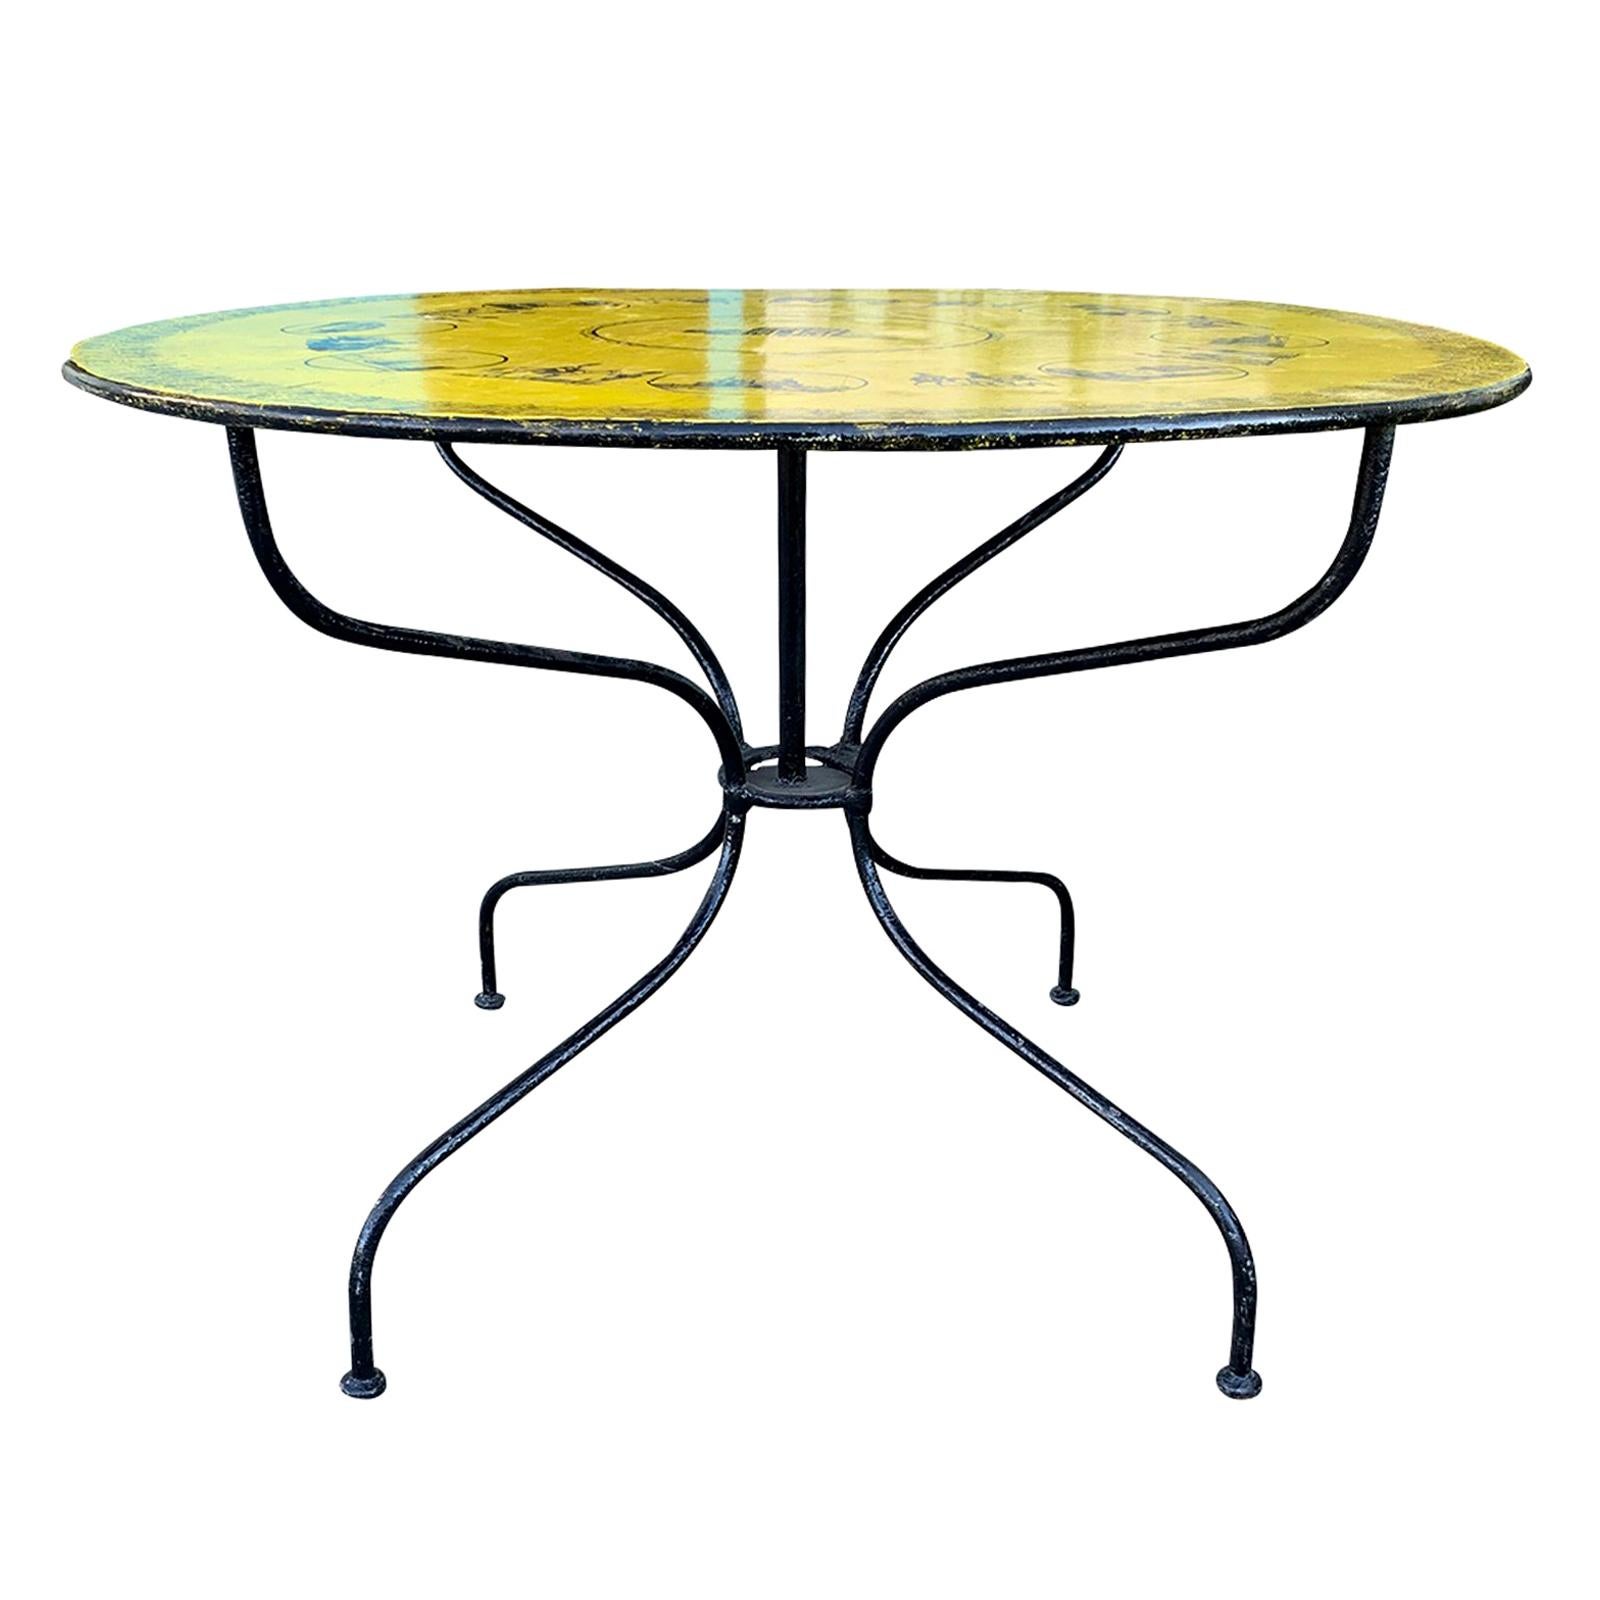 Mid-20th Century Italian Neoclassical Style Round Tole Table im Angebot